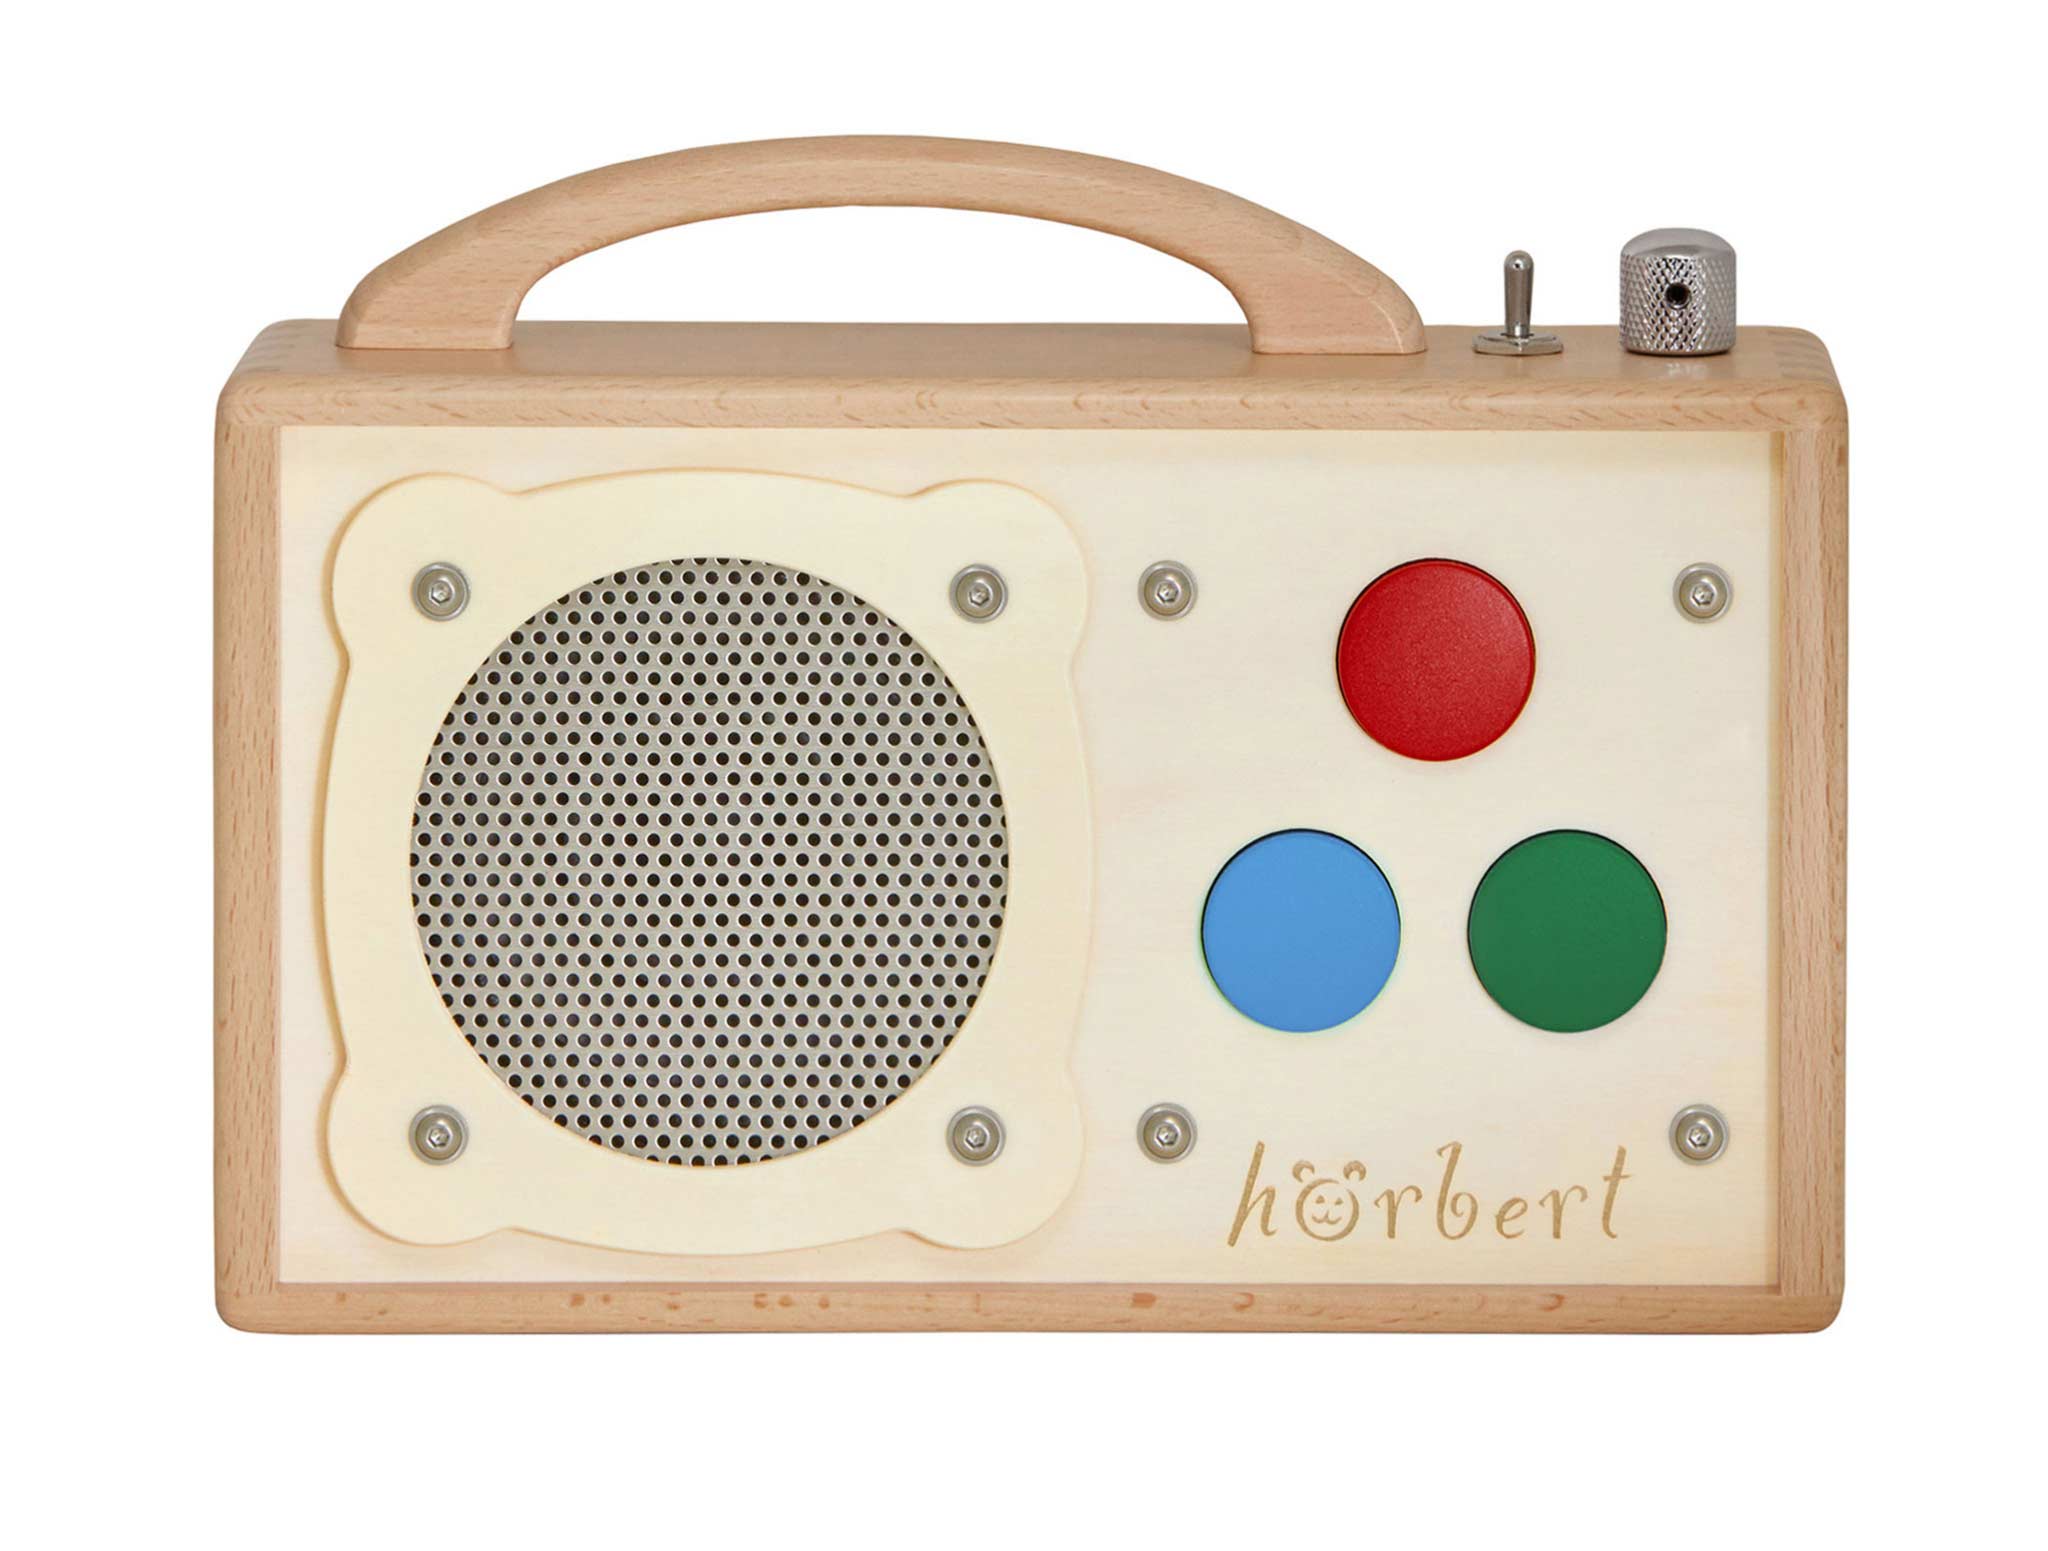 hörbert for people with disabilities. Barrier-free audio player and MP3 player